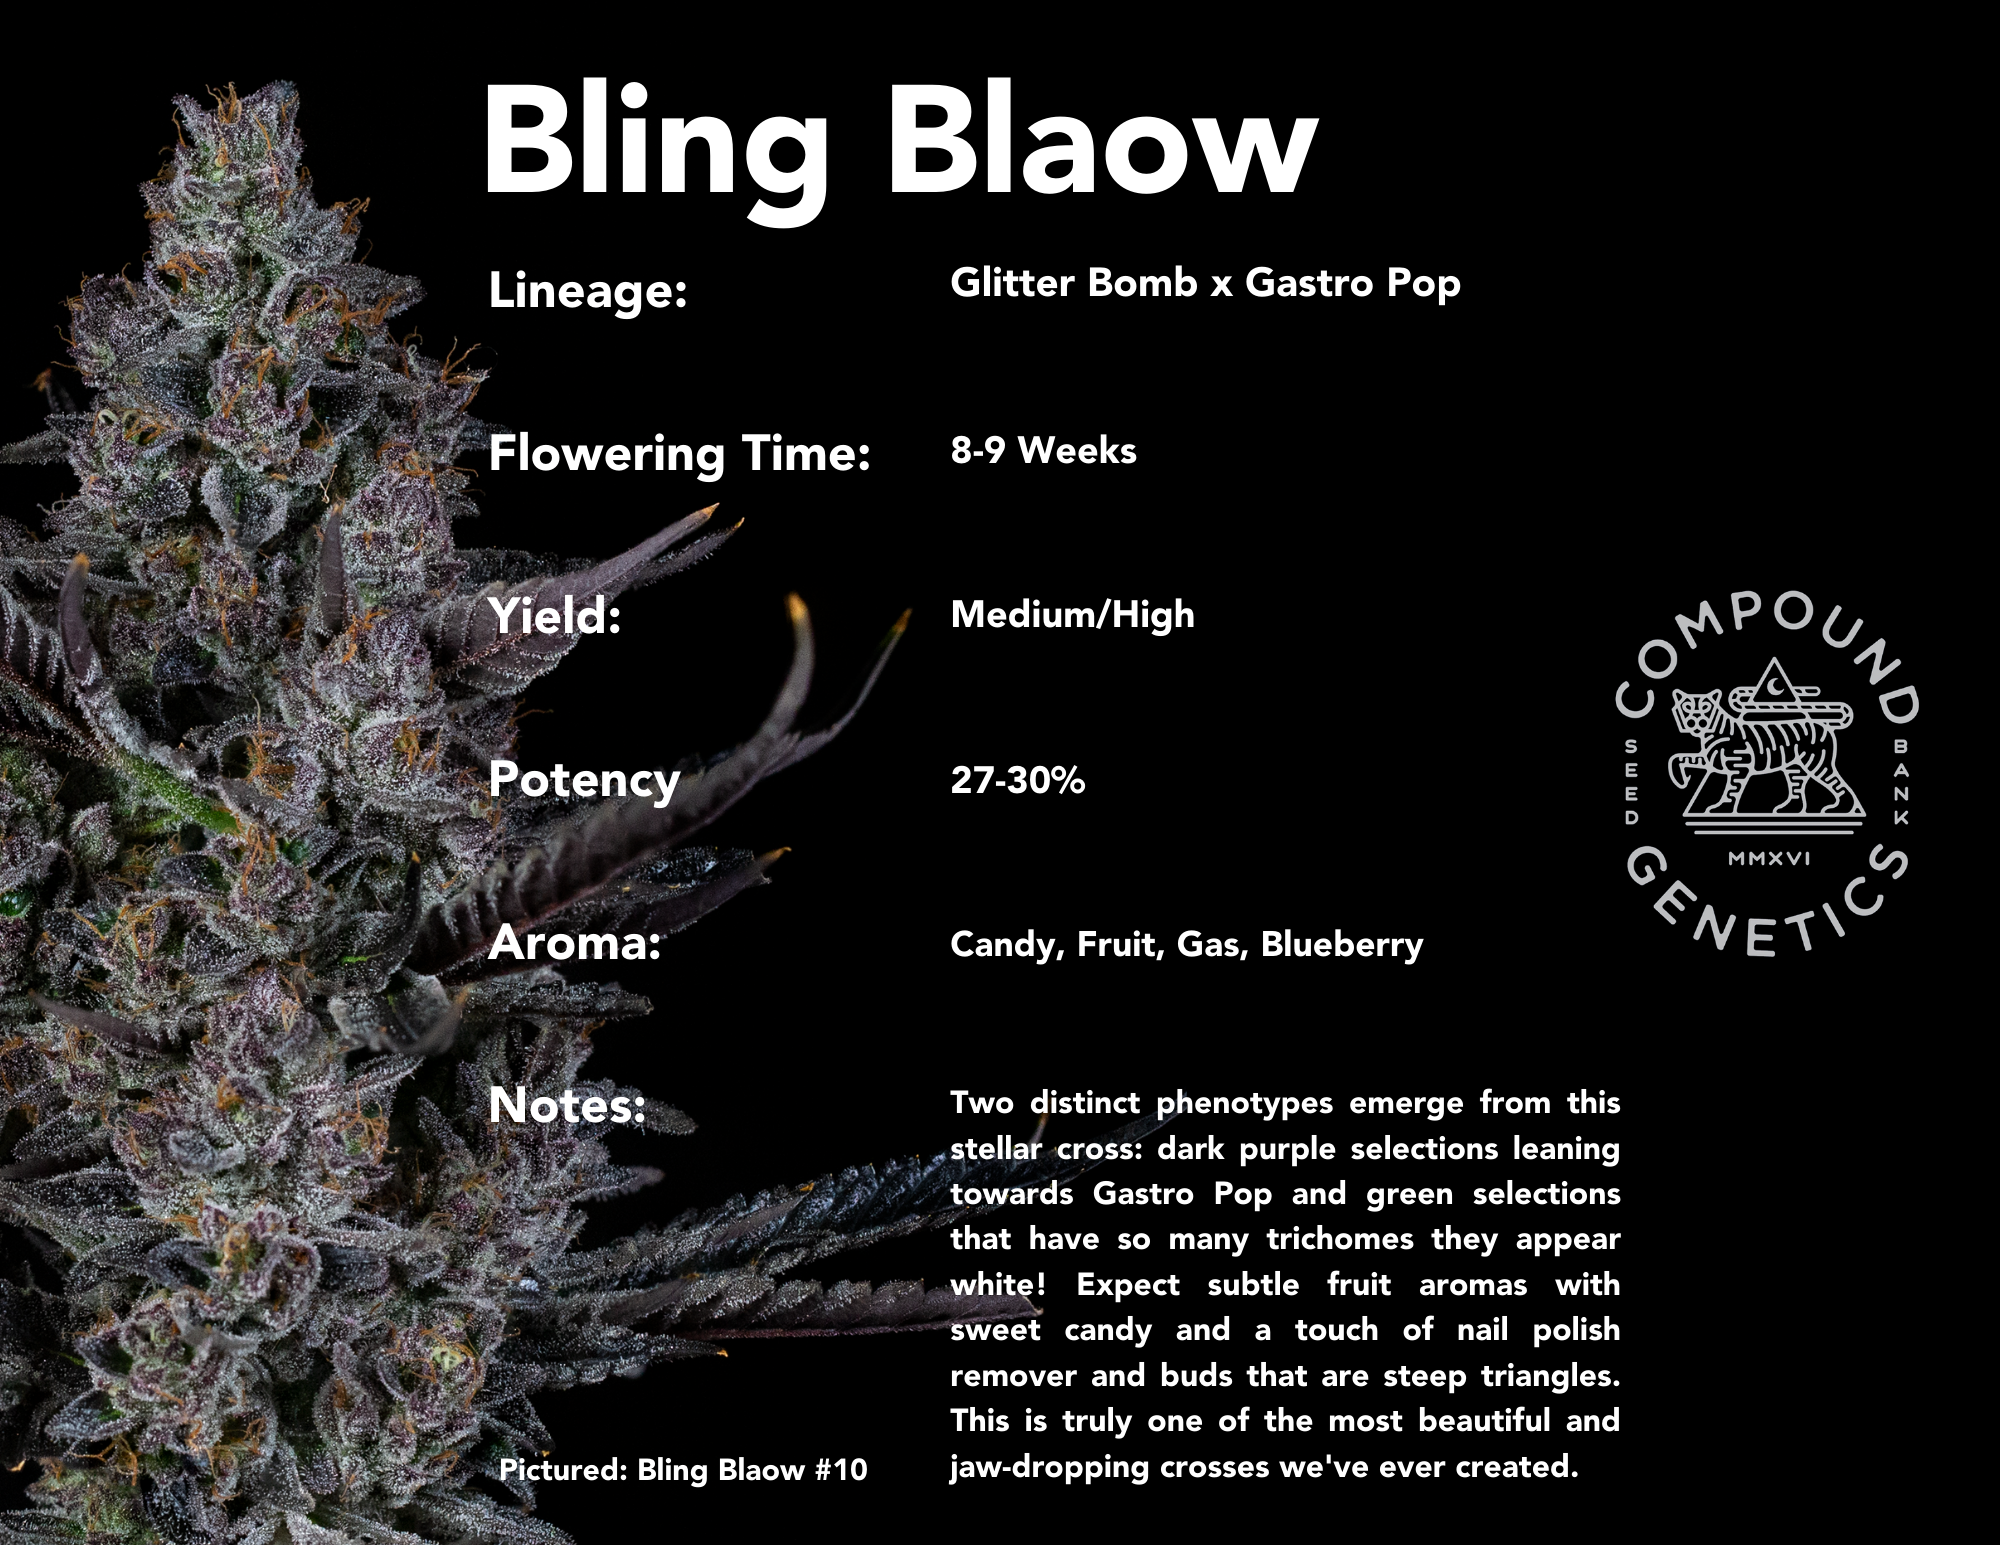 Bling Blaow bred by Compound Genetics